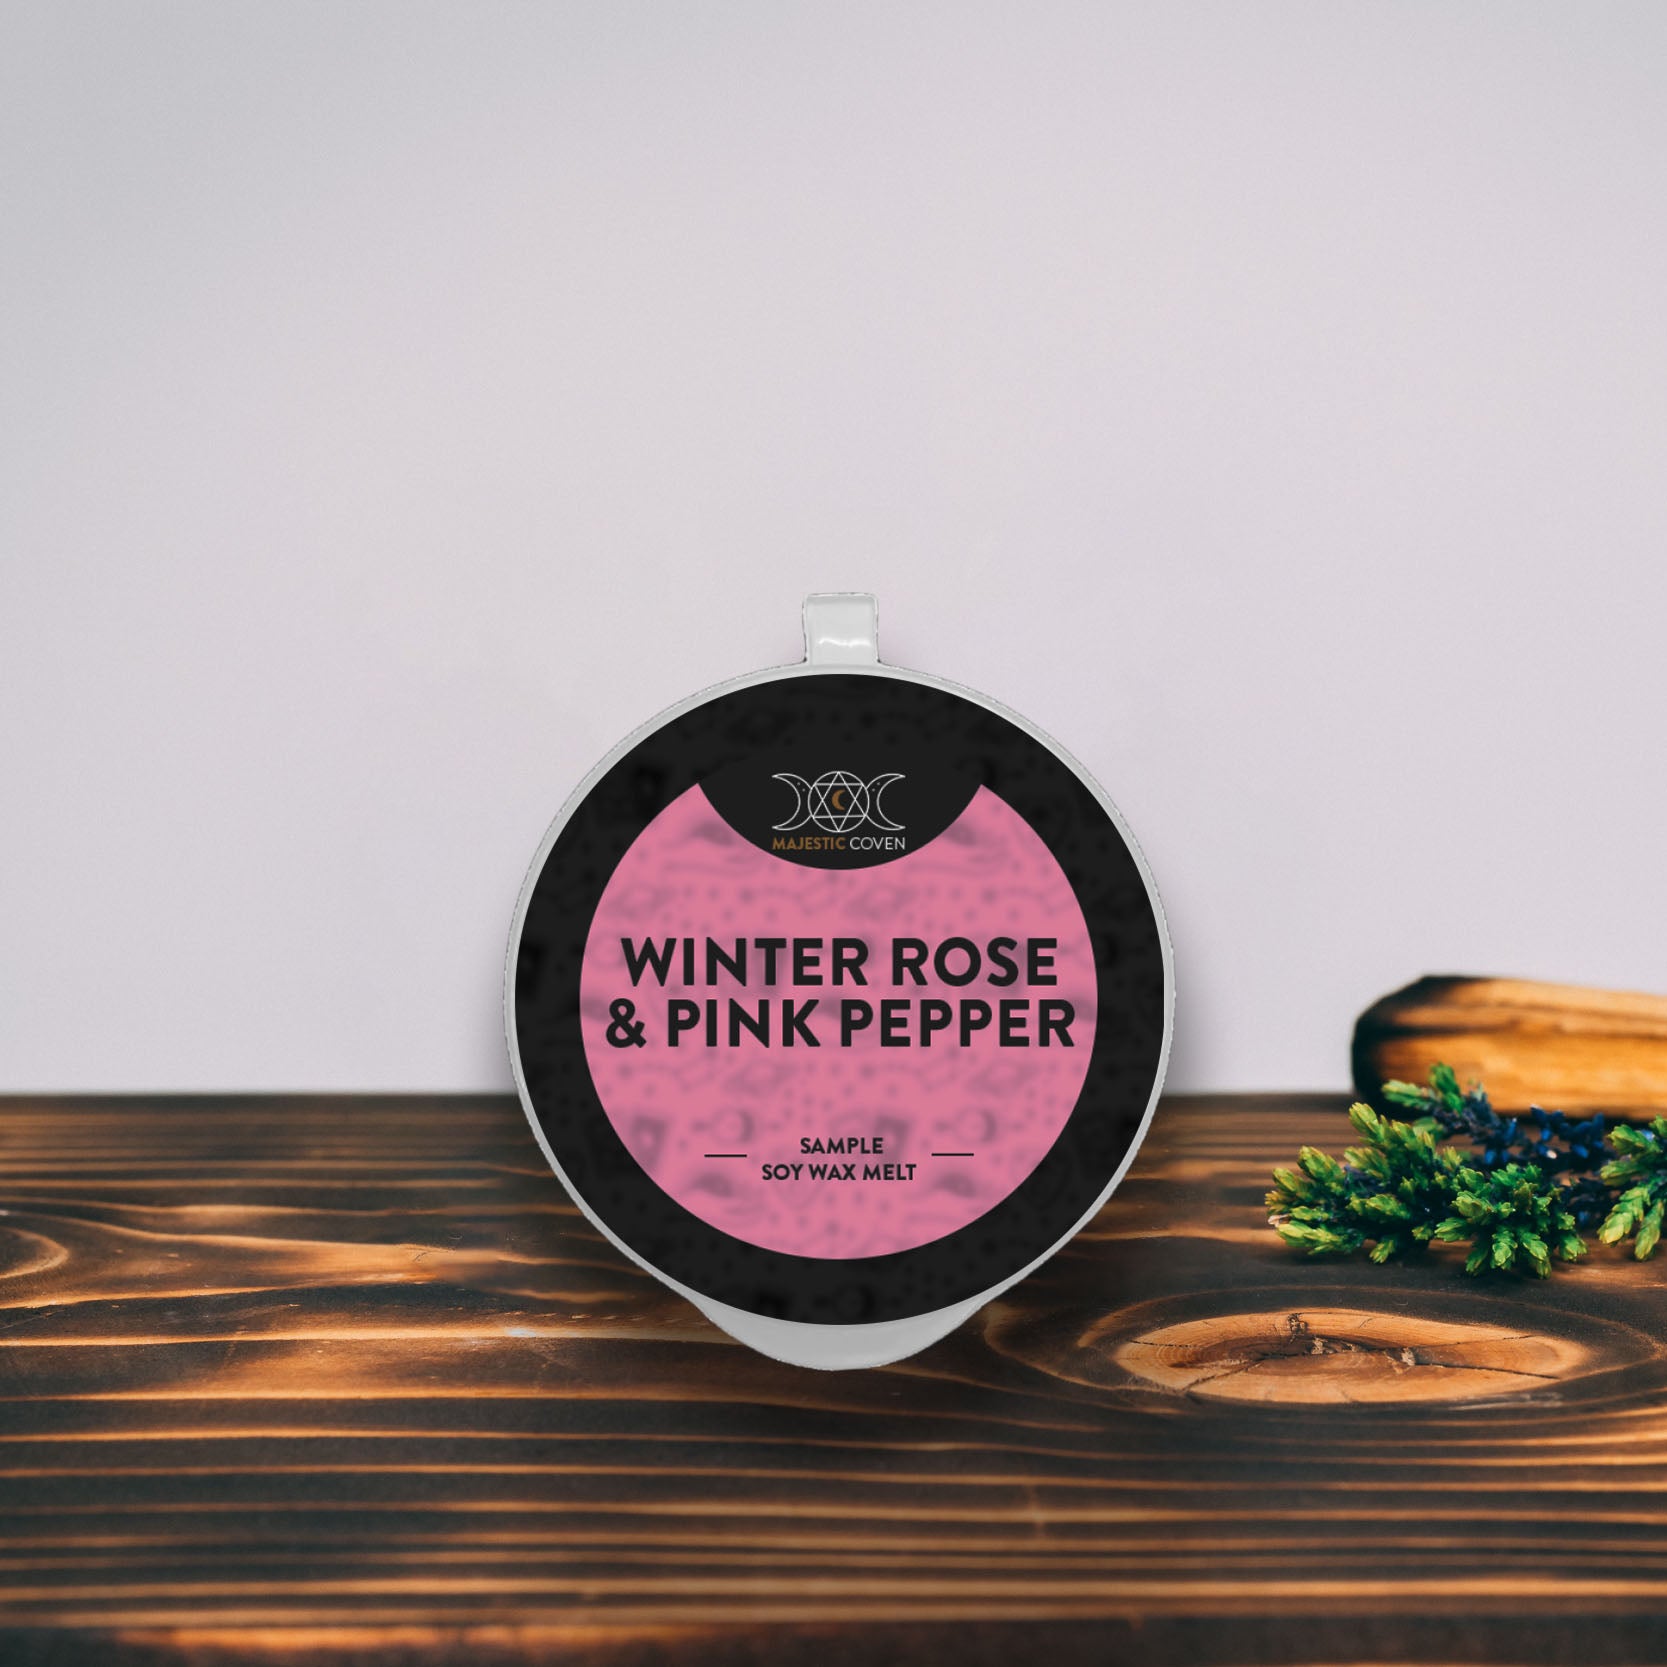 Winter Rose & Pink Pepper - Soy Wax Melt 20g Sample Pot Majestic Coven